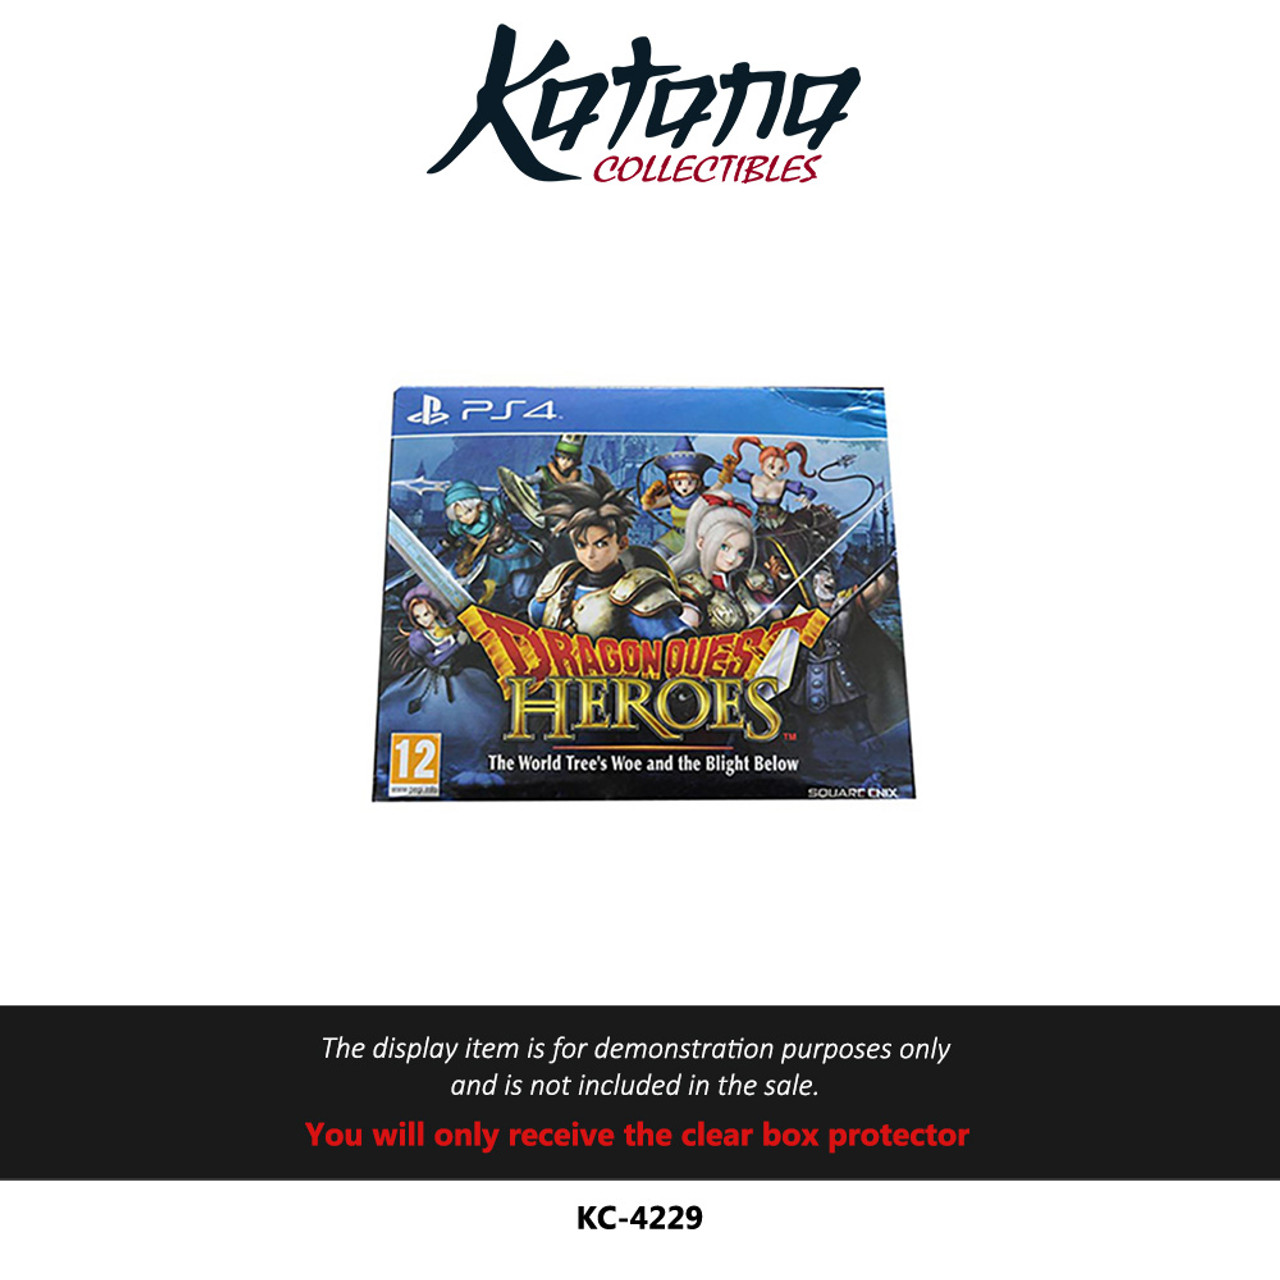 Katana Collectibles Protector For Dragon Quest Heroes: Slime Collectors Edition (PS4), Flap Open On Side